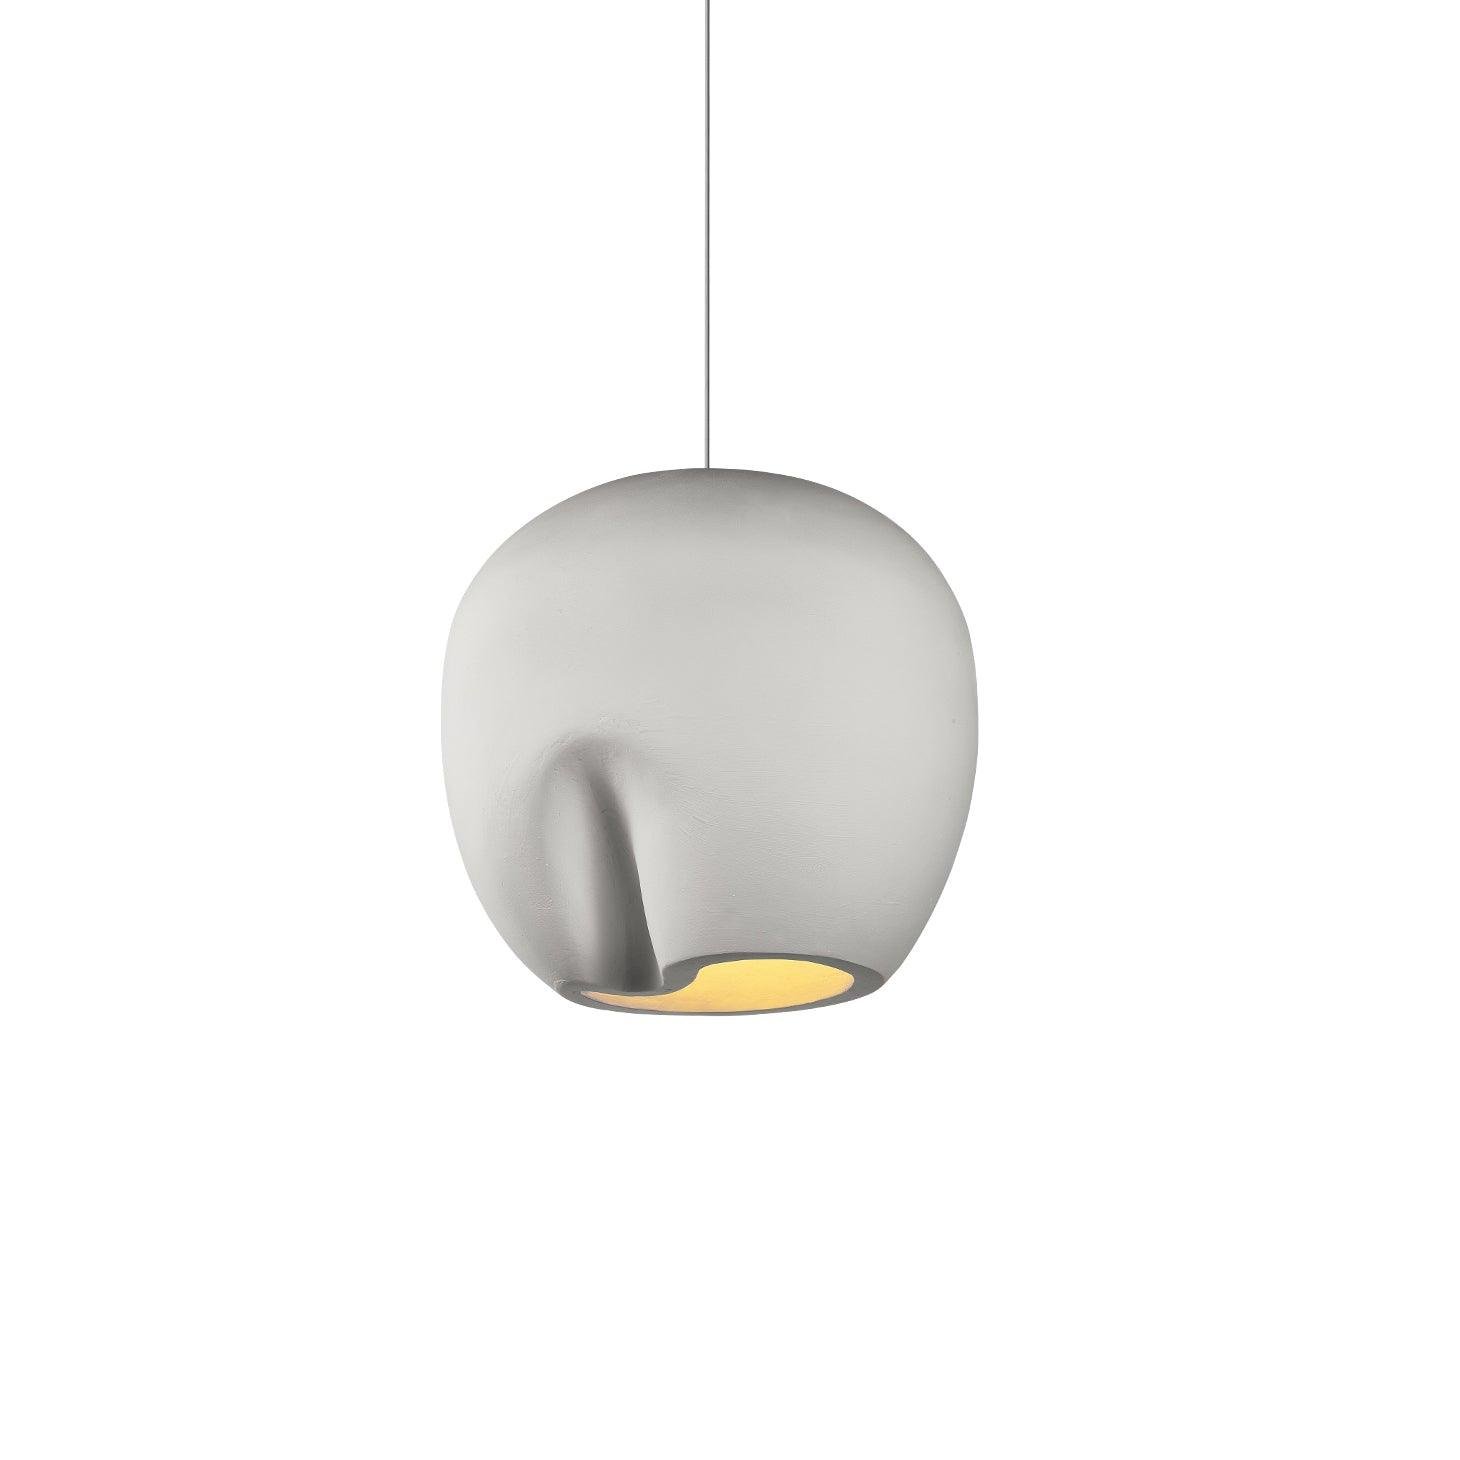 White Bucket Pendant Lamp, measuring 23.6 inches in diameter and standing at a height of 23.6 inches (60cm x 60cm).